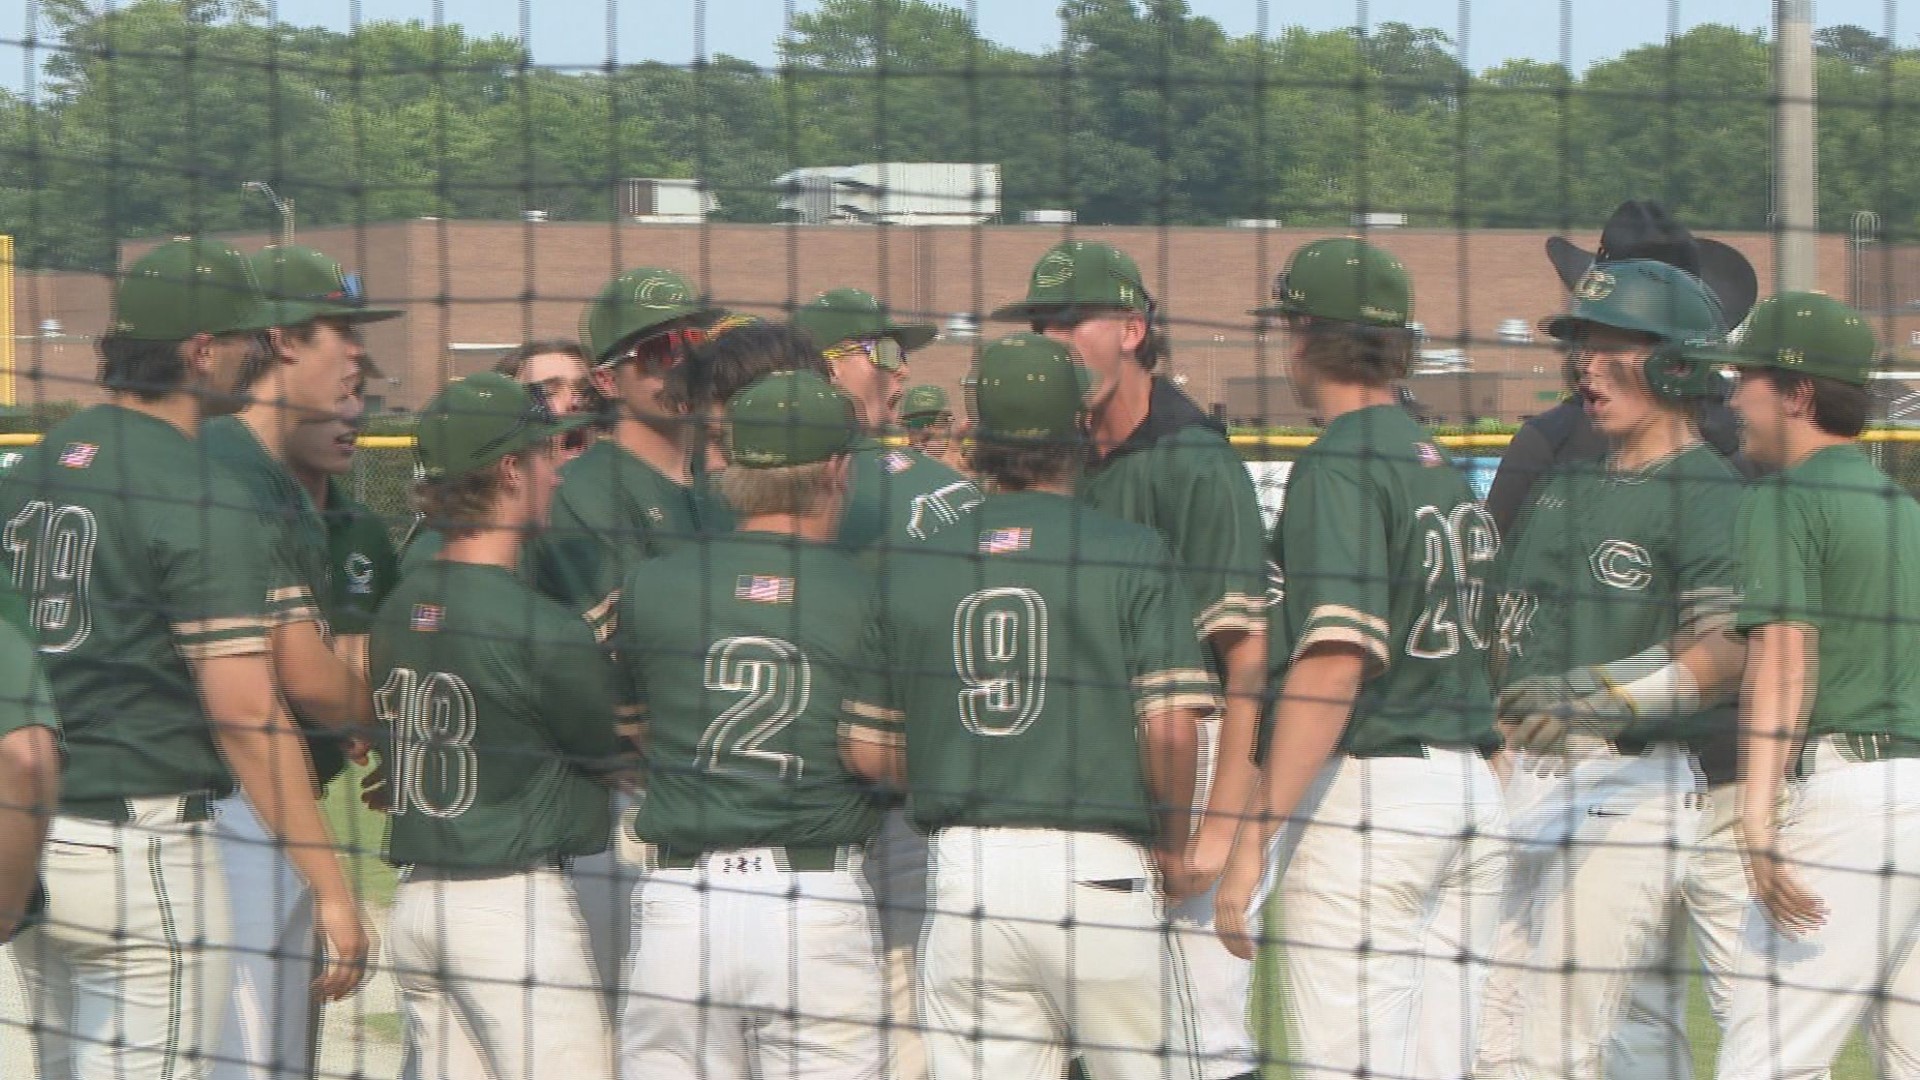 It was win or go home time for several area high schools in the state quarterfinals on Tuesday.